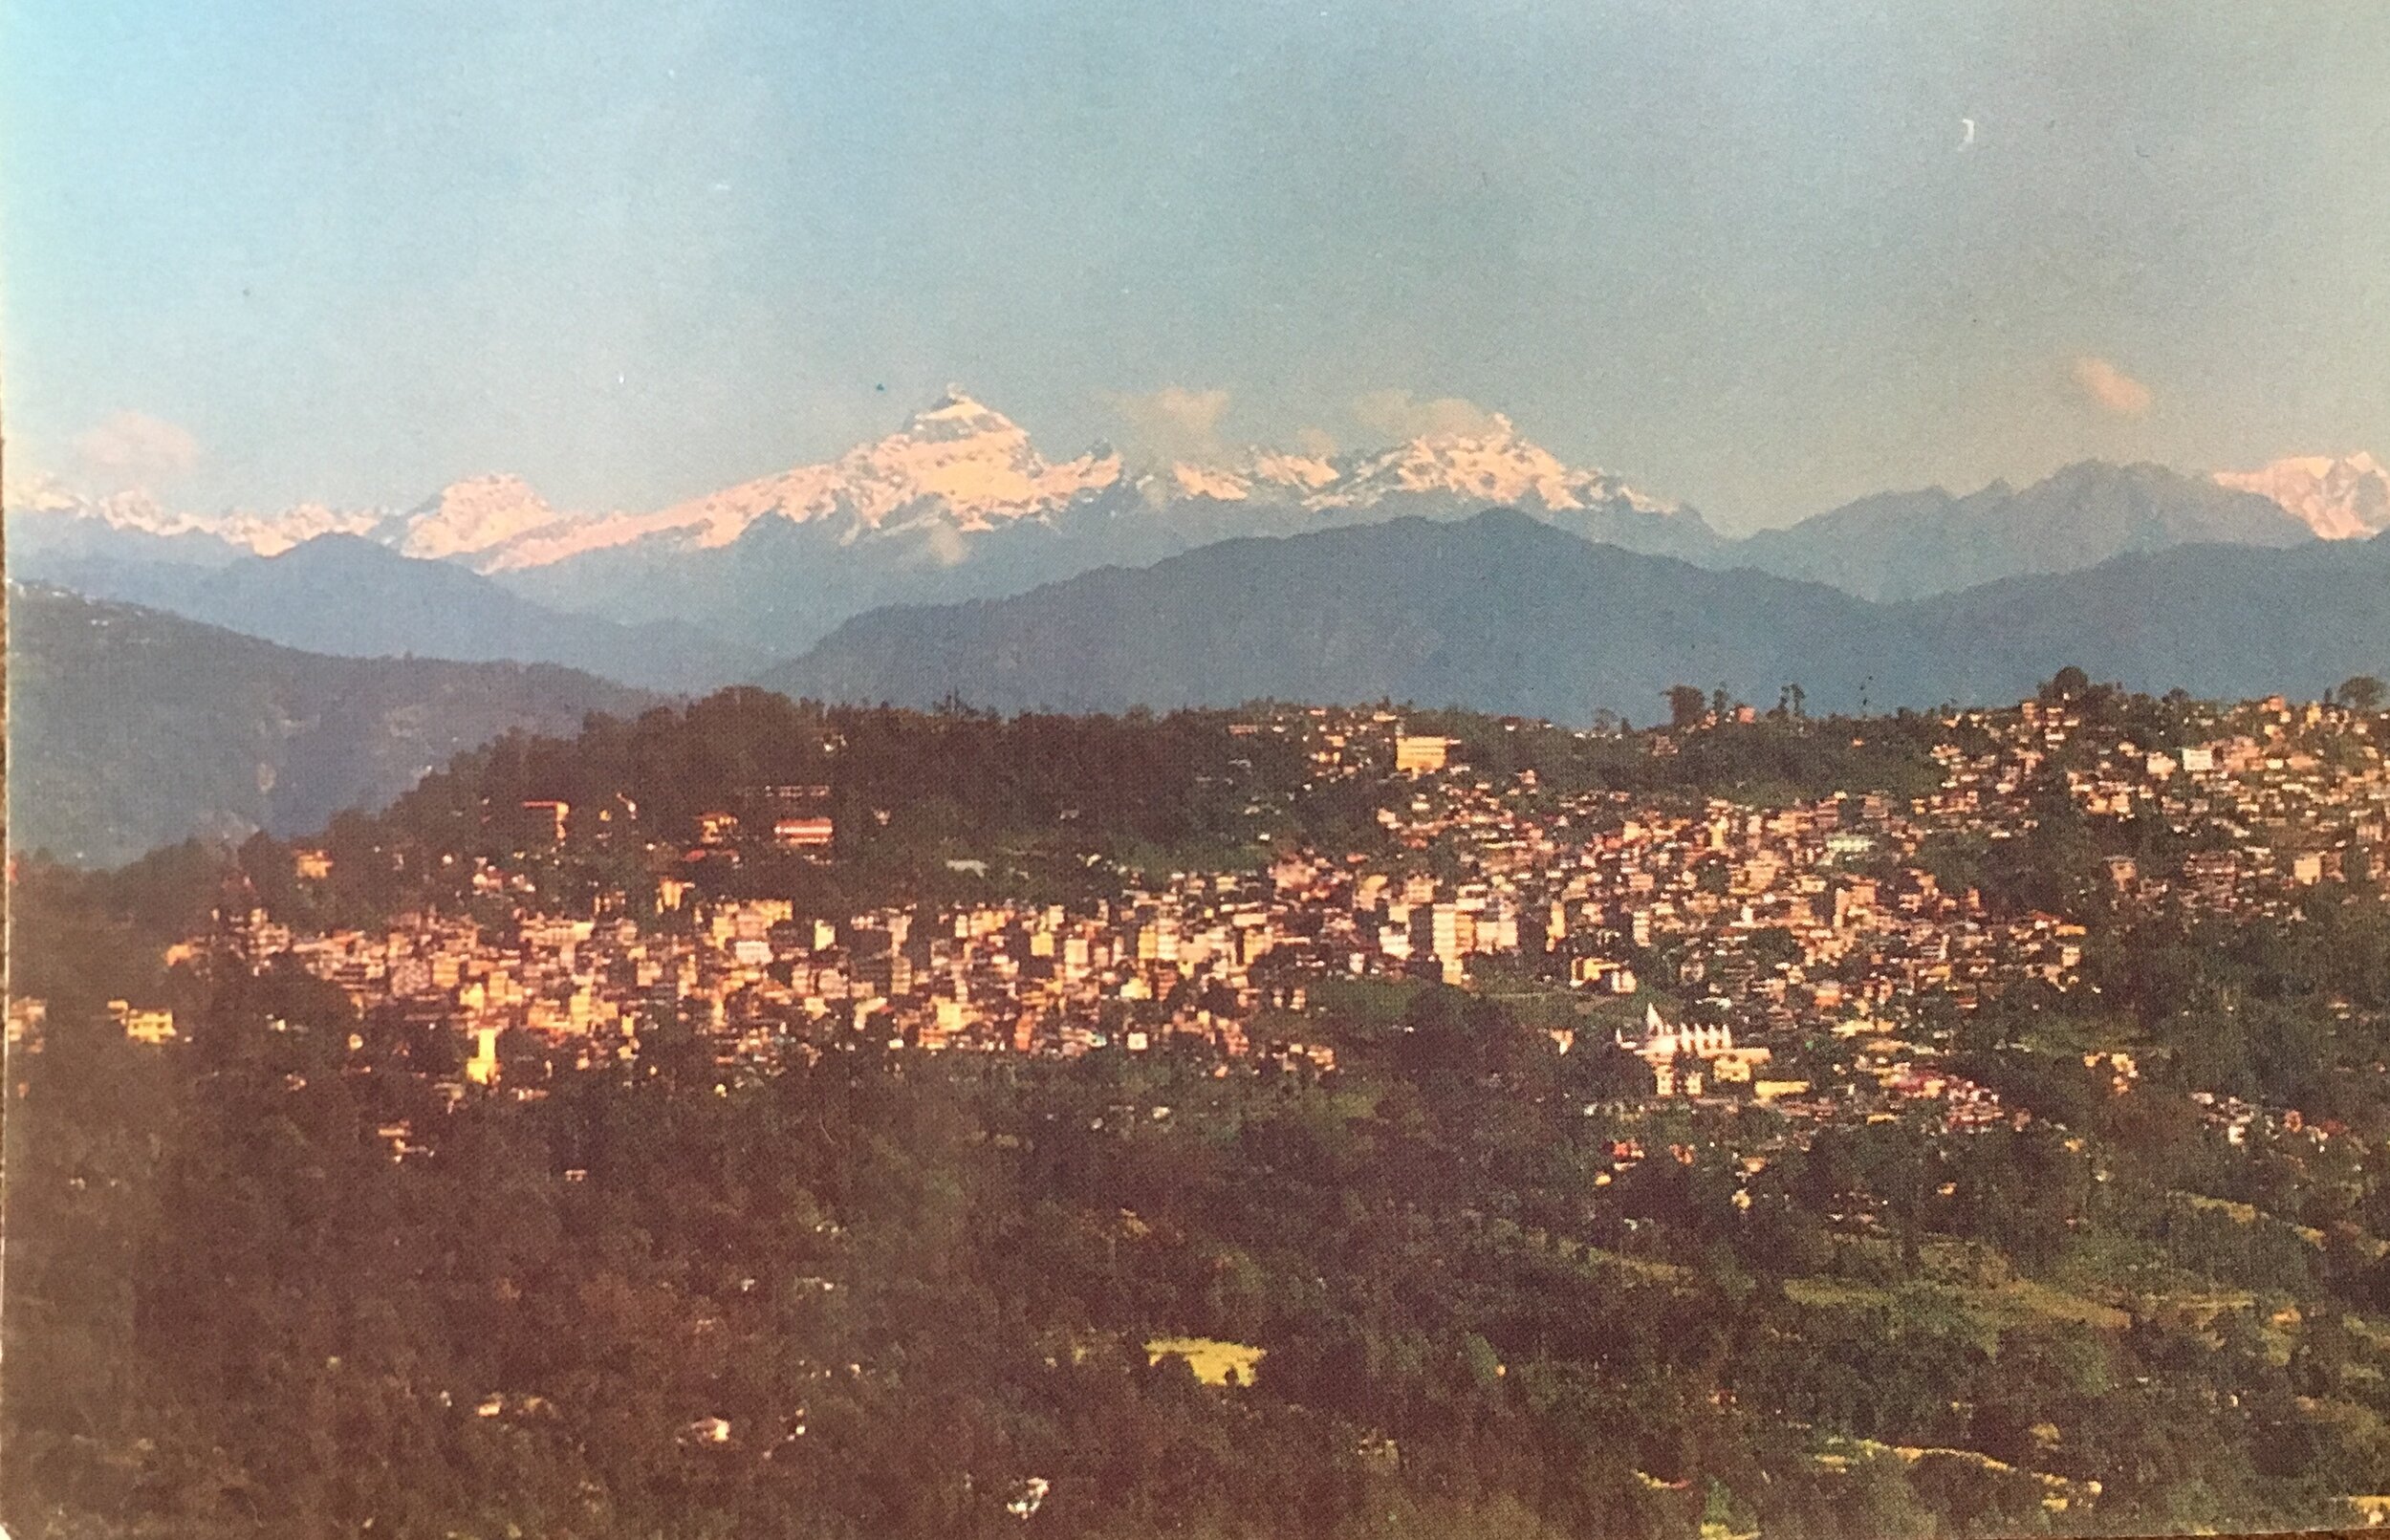 Details about   Kinchinjunga From The Mall Himalayas India Vintage Postcard  US126 